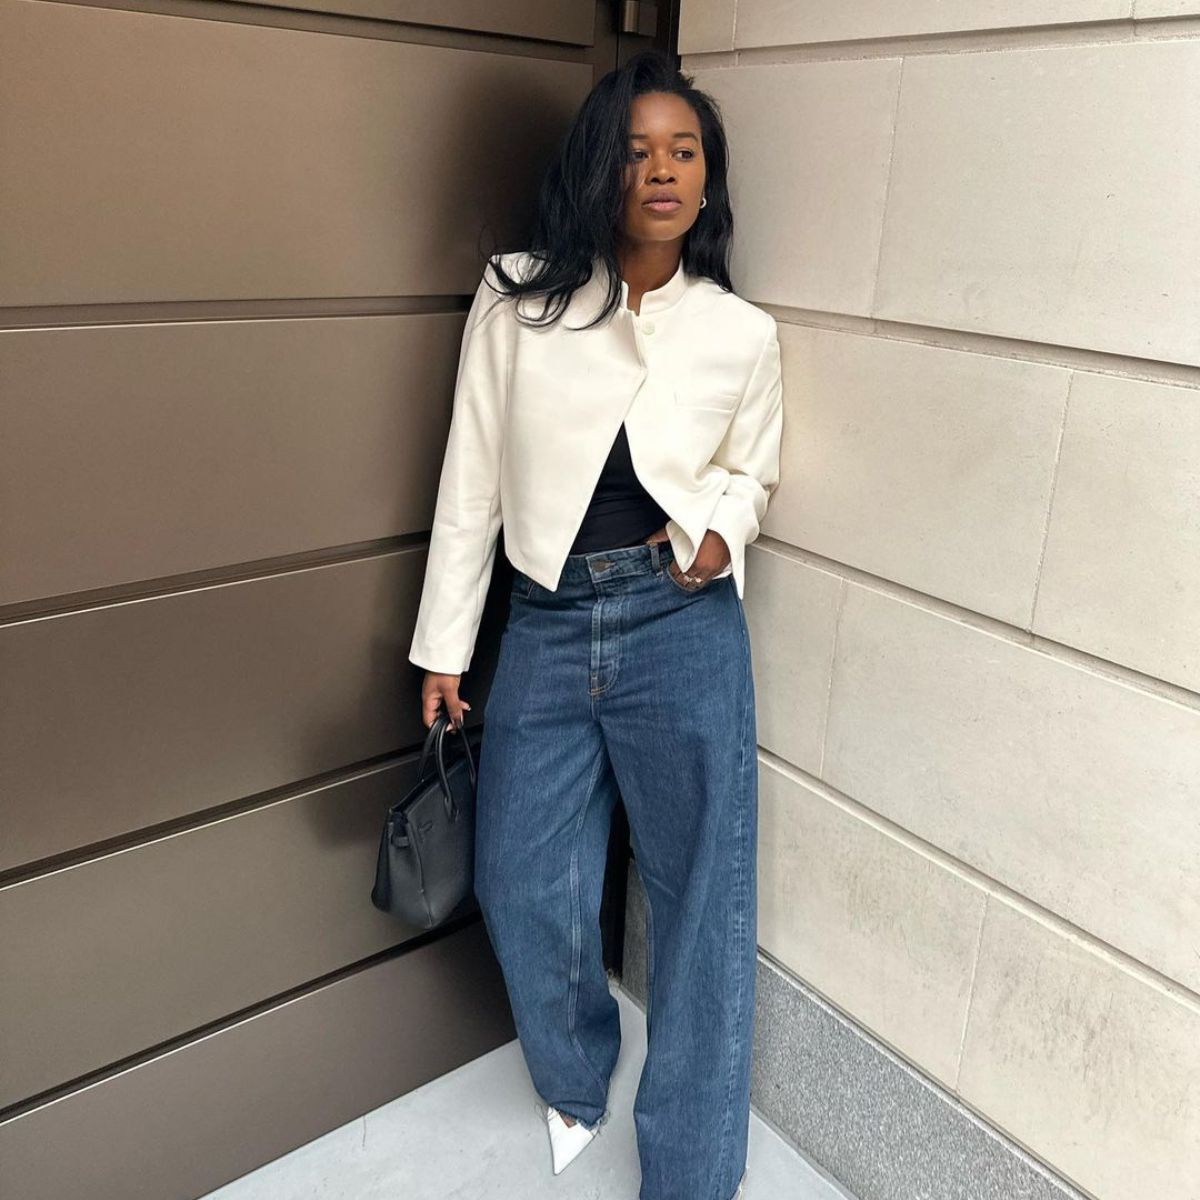 3 Tips for Finding the Perfect Pair of White Wide Leg Pants